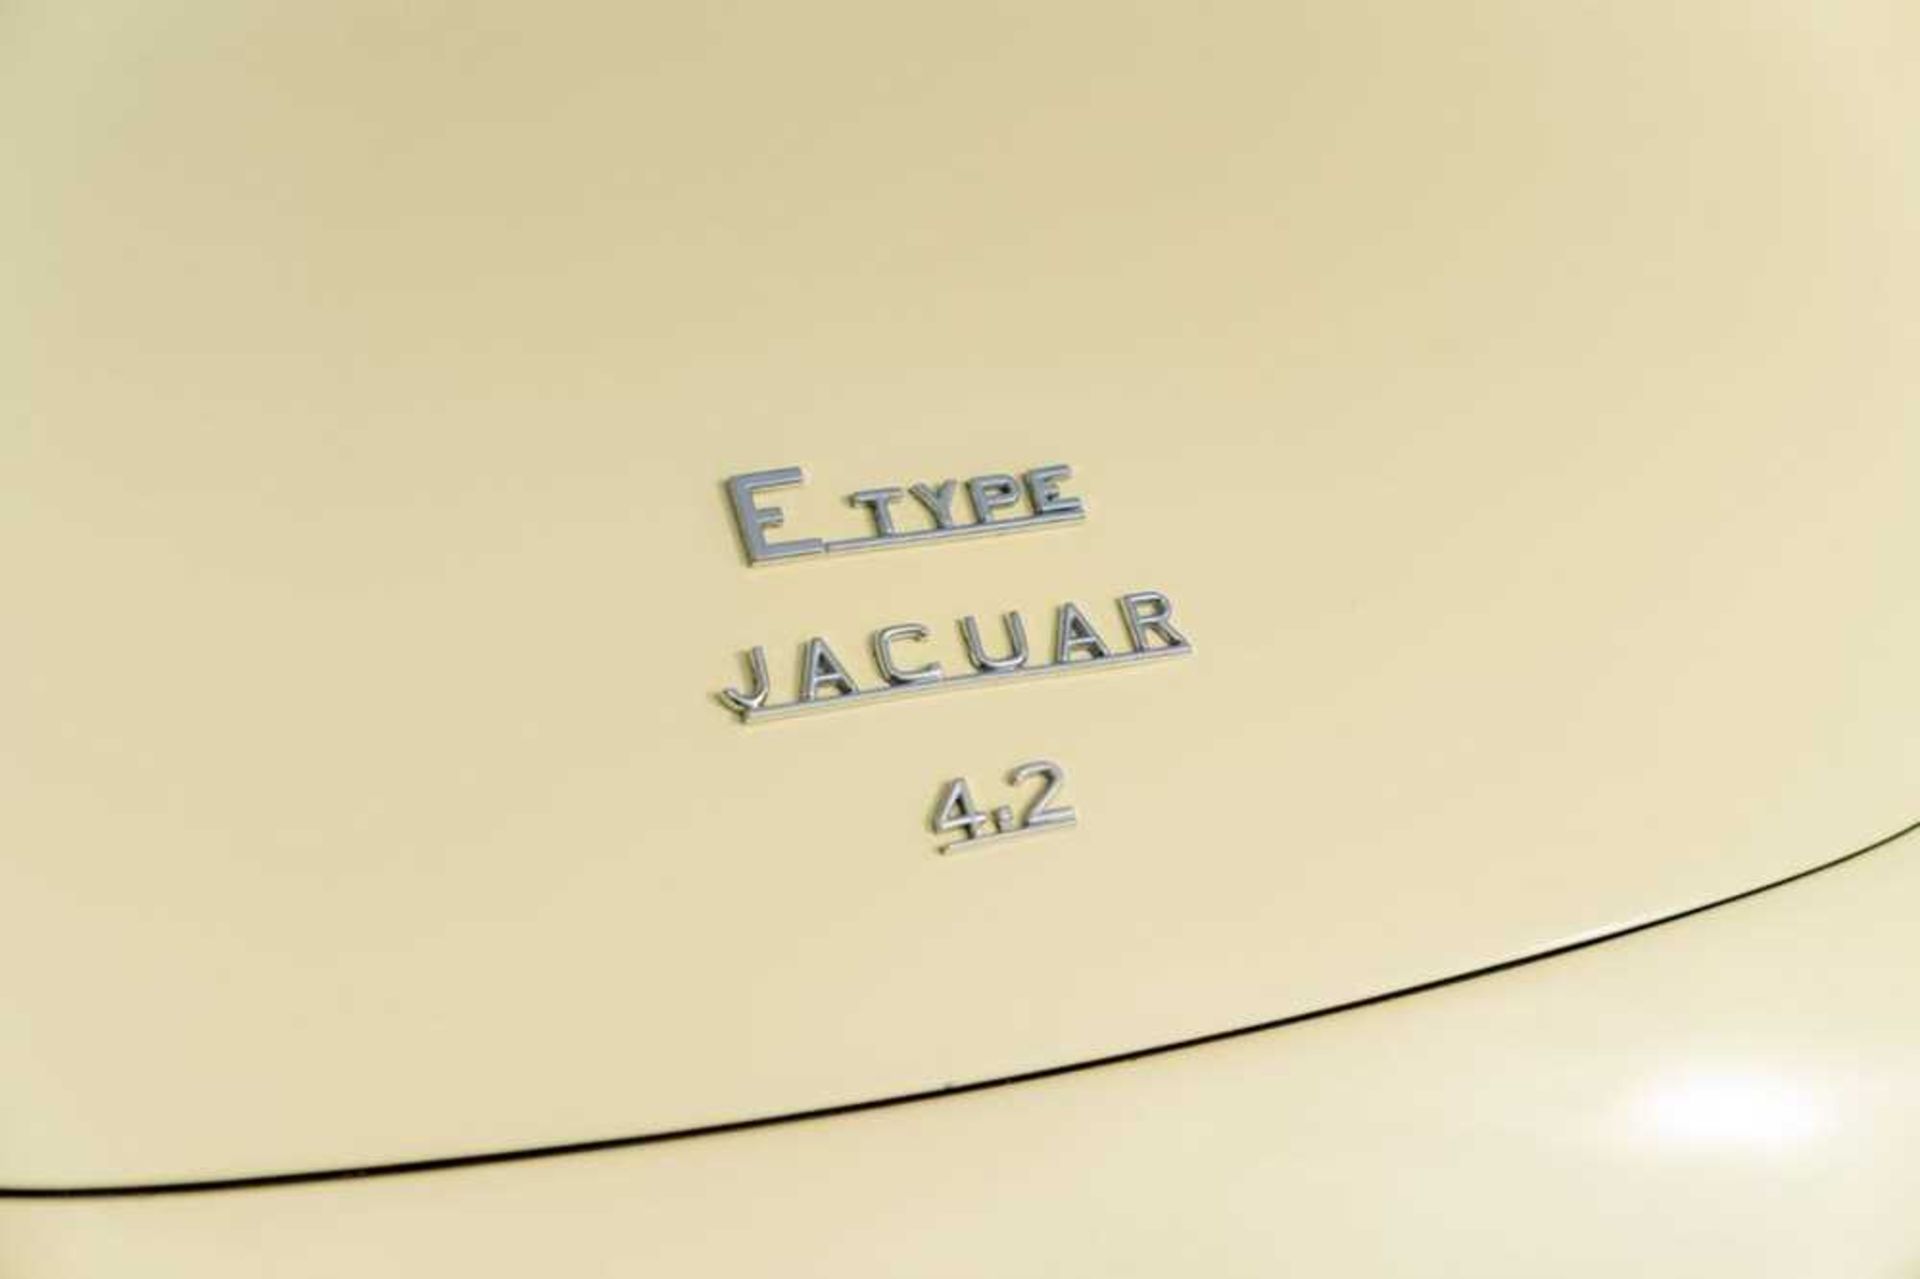 1968 Jaguar E-Type 4.2 Litre Coupe Genuine 44,000 miles from new - Image 9 of 68